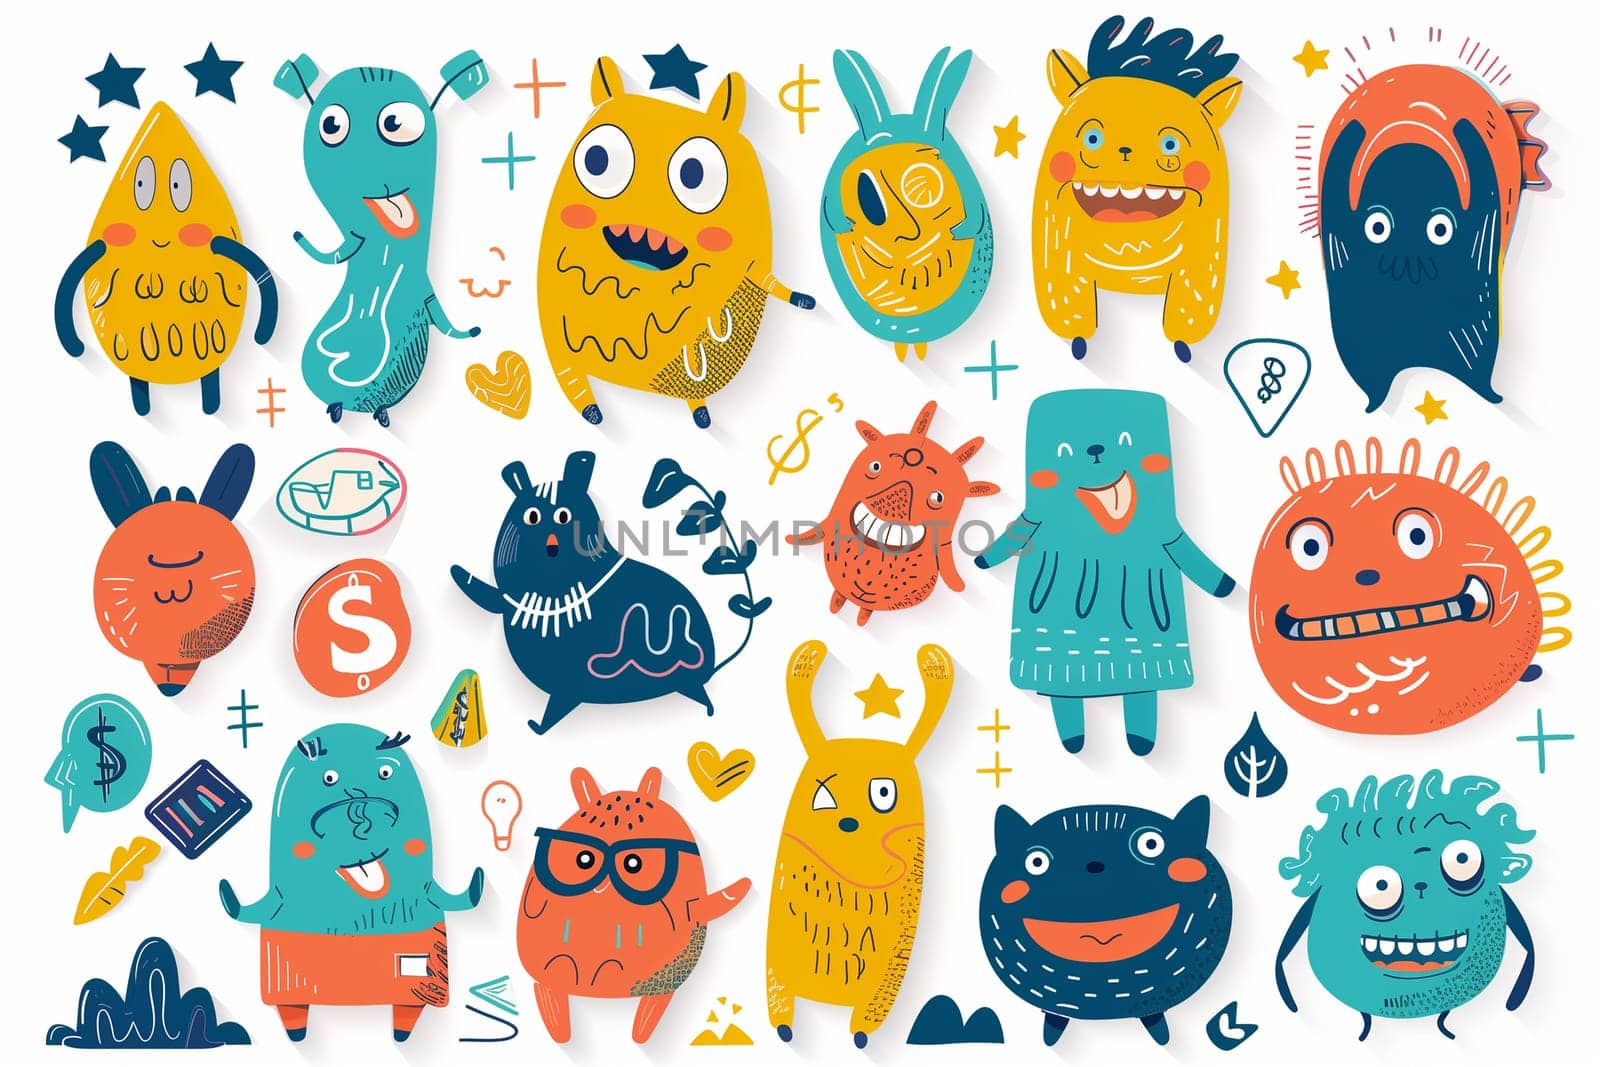 Group of Cartoon Monsters on White Background by Sd28DimoN_1976